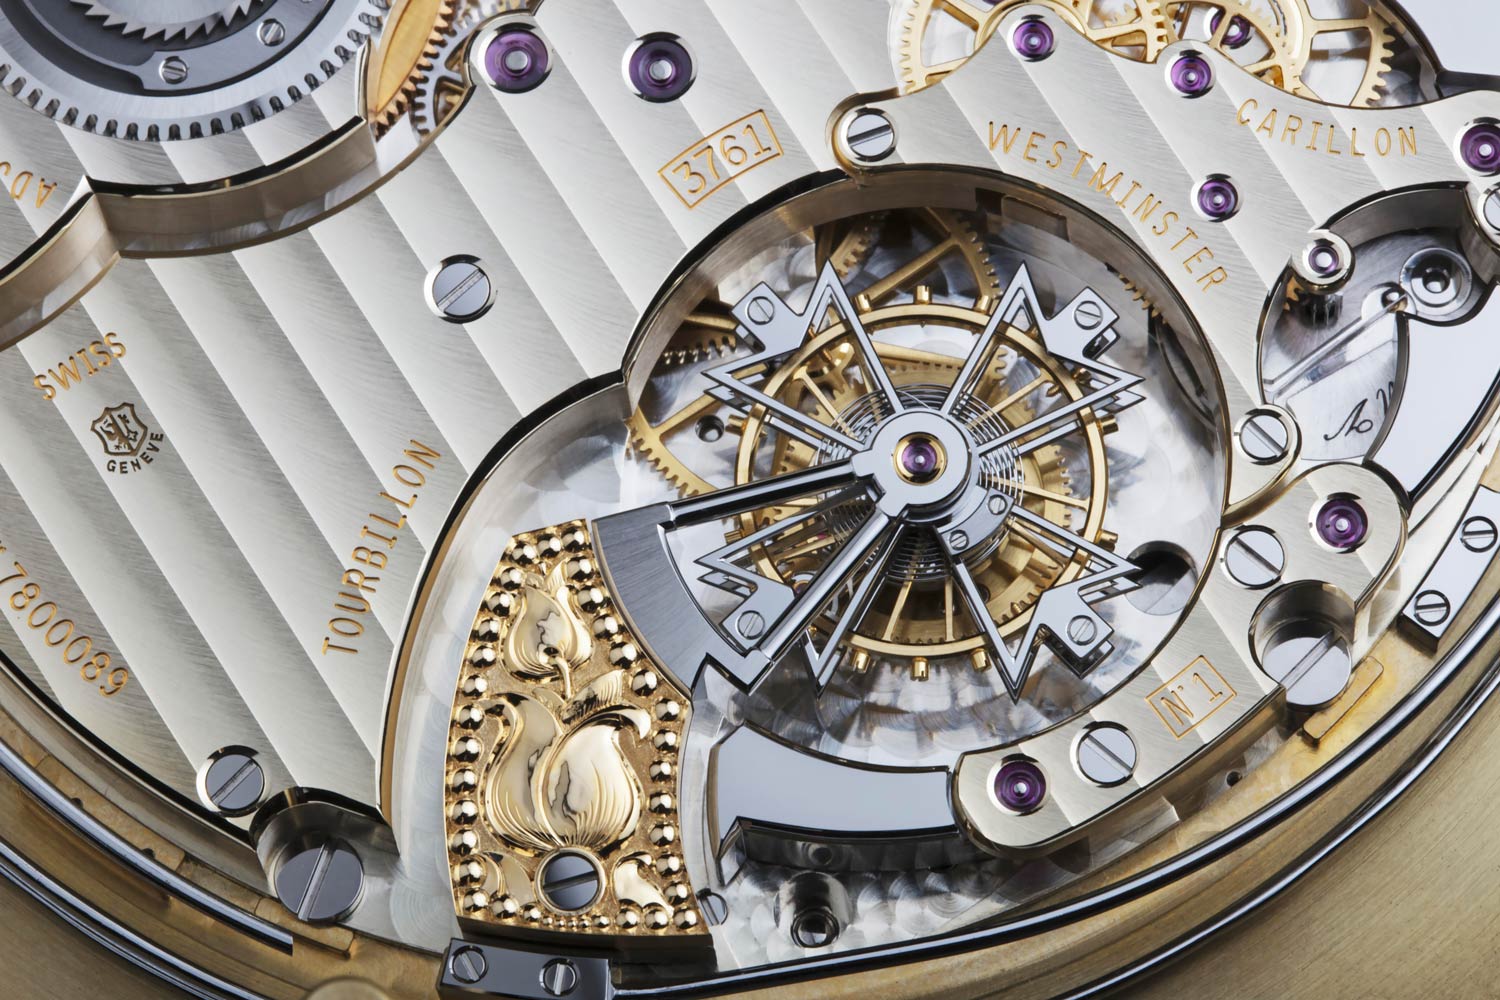 All the components in the Calibre 3761 are hand-finished – from the completely engraved balance bridge to the bridges buffed with diamond paste to achieve a mirror-polished finish, as well as the galvanic treatment of the plates adorned with Côtes de Genève.